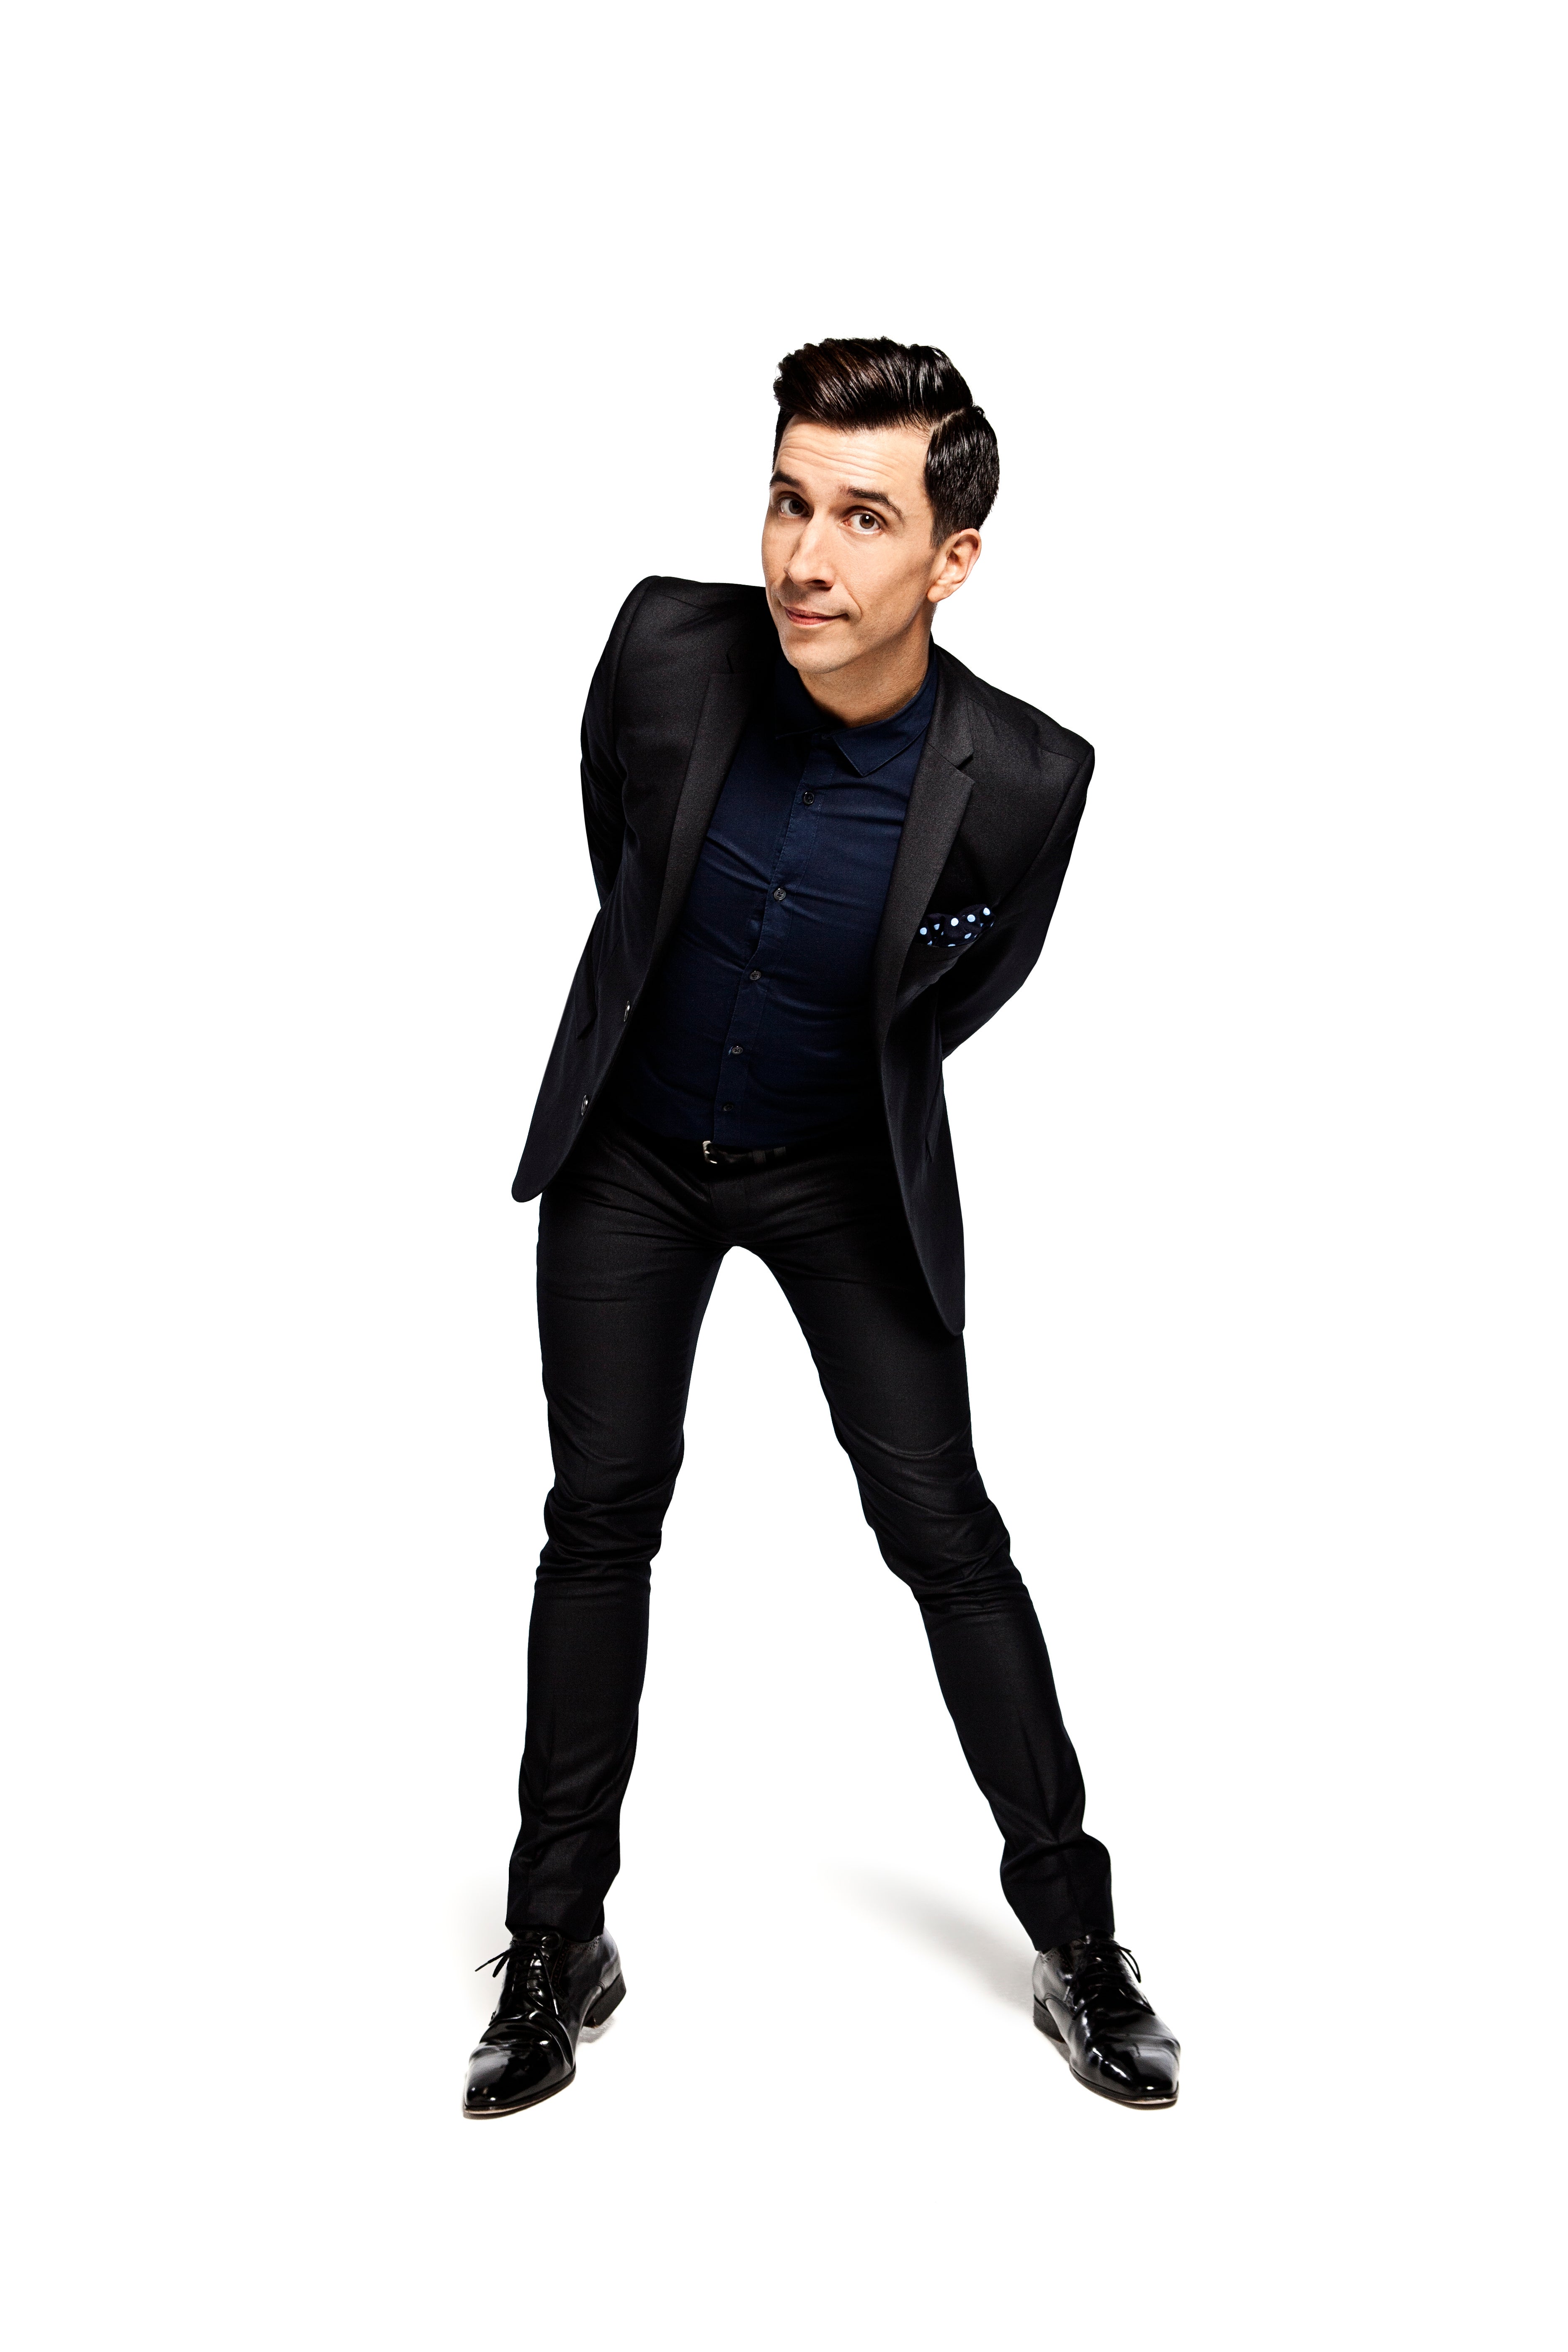 Russell Kane: Hyperactive pre-sale code